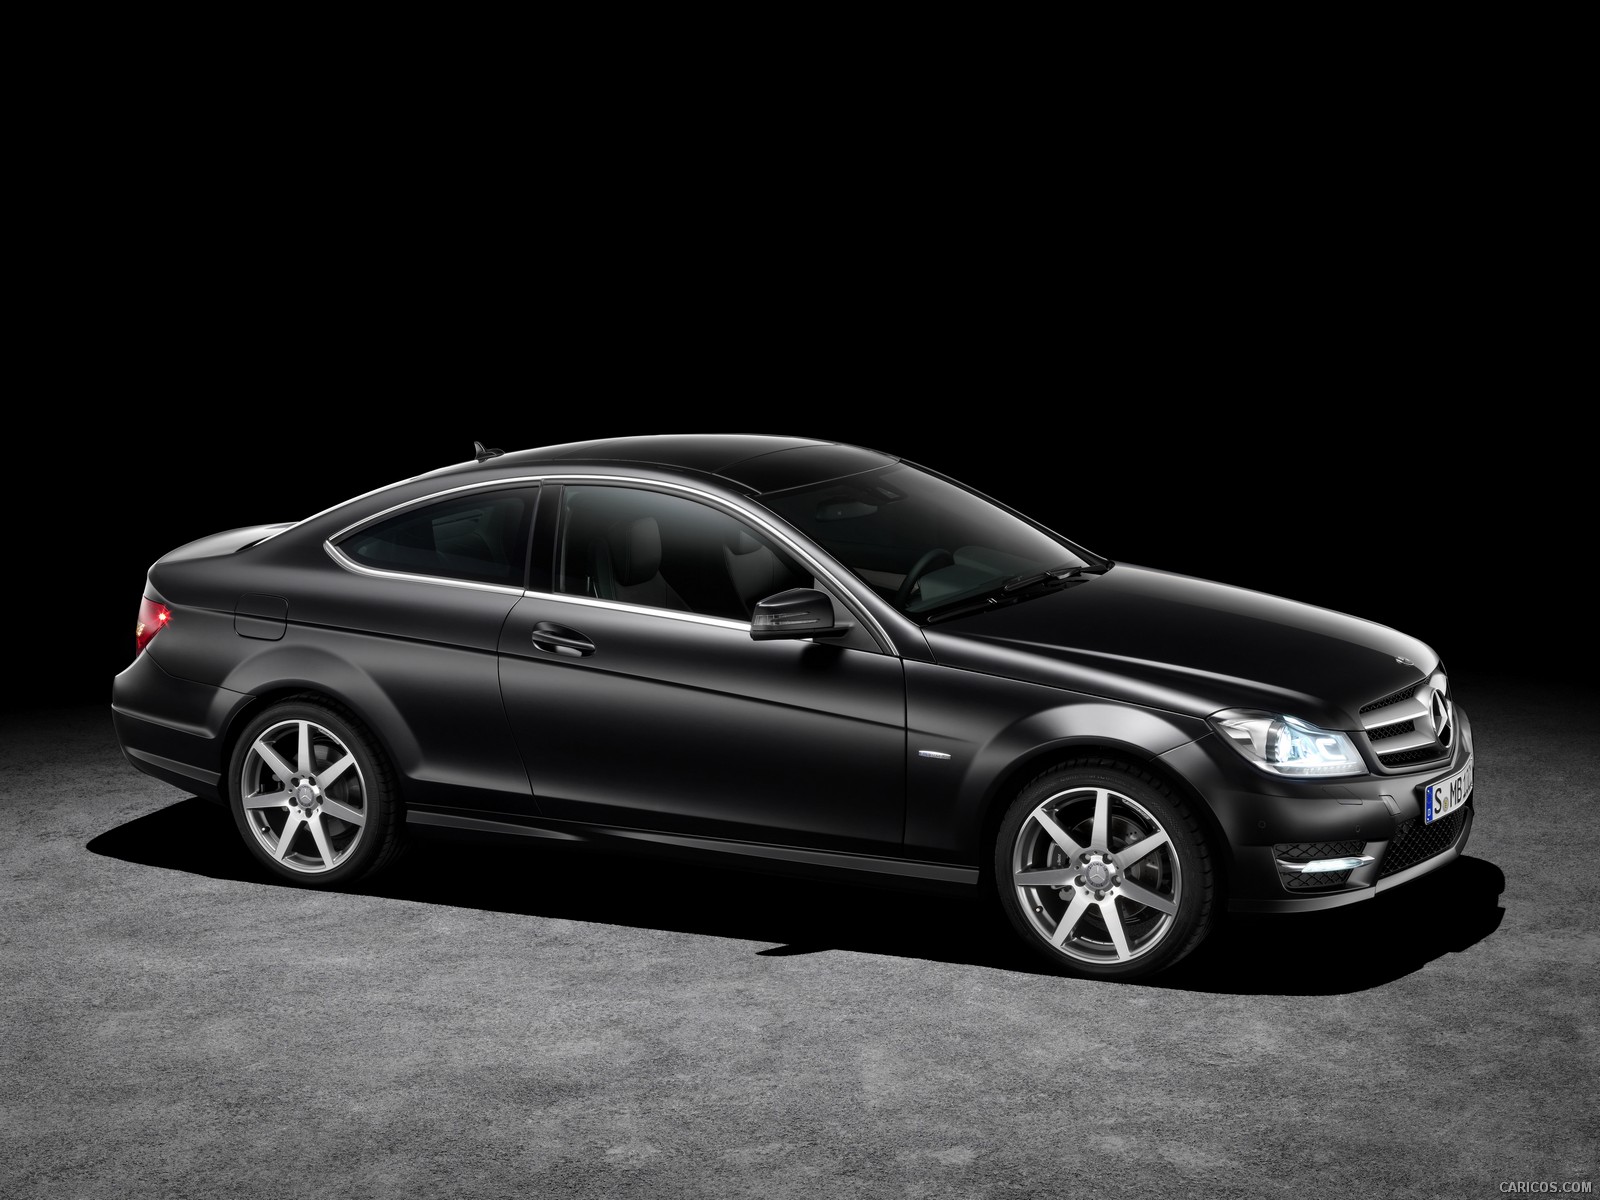 Mercedes-Benz C-Class Coupe (2012)  - Side, #24 of 79